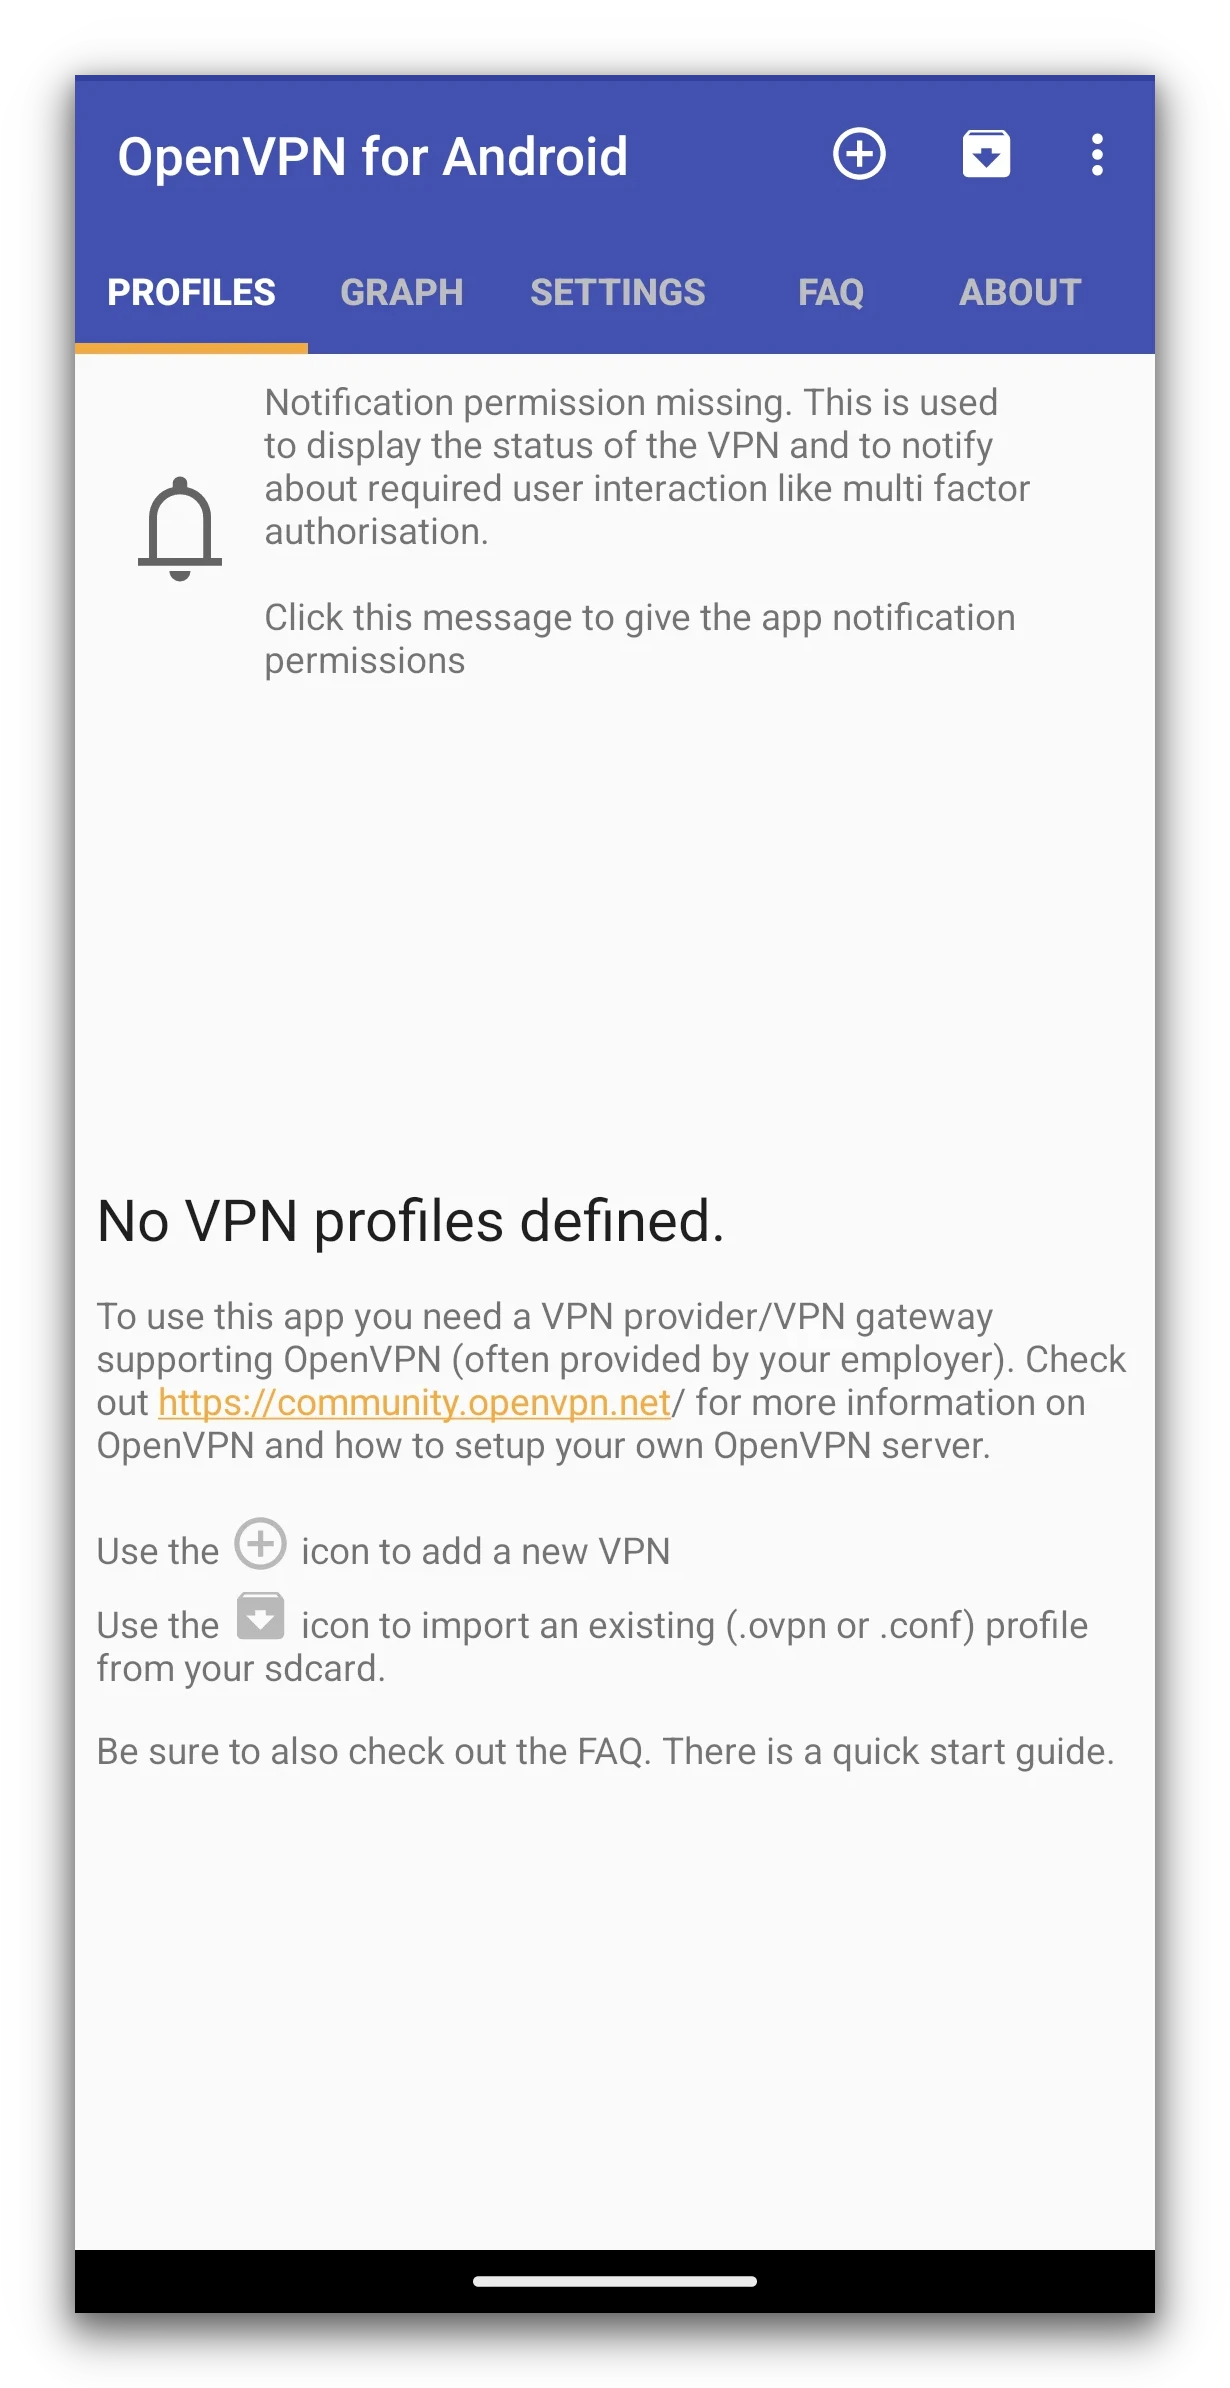 OpenVPN for Android home screen